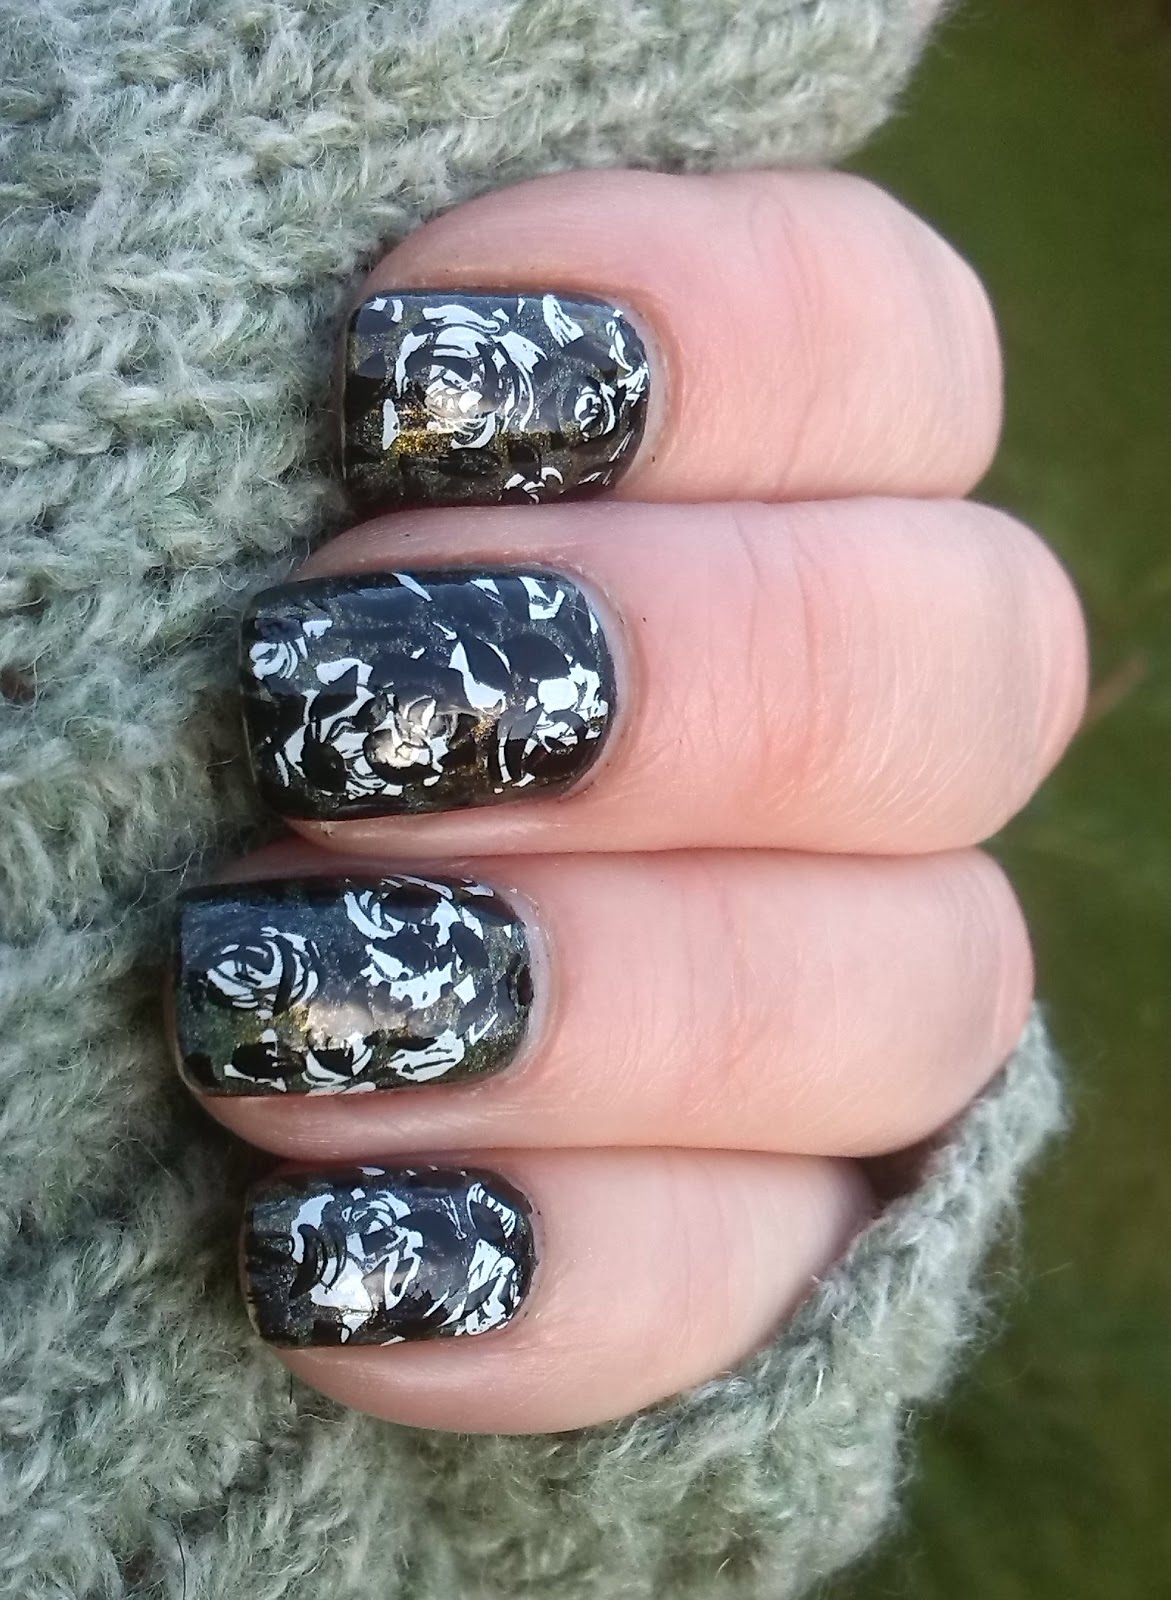 Moyou London Kitty 14 and Pro XL 10 double stamping